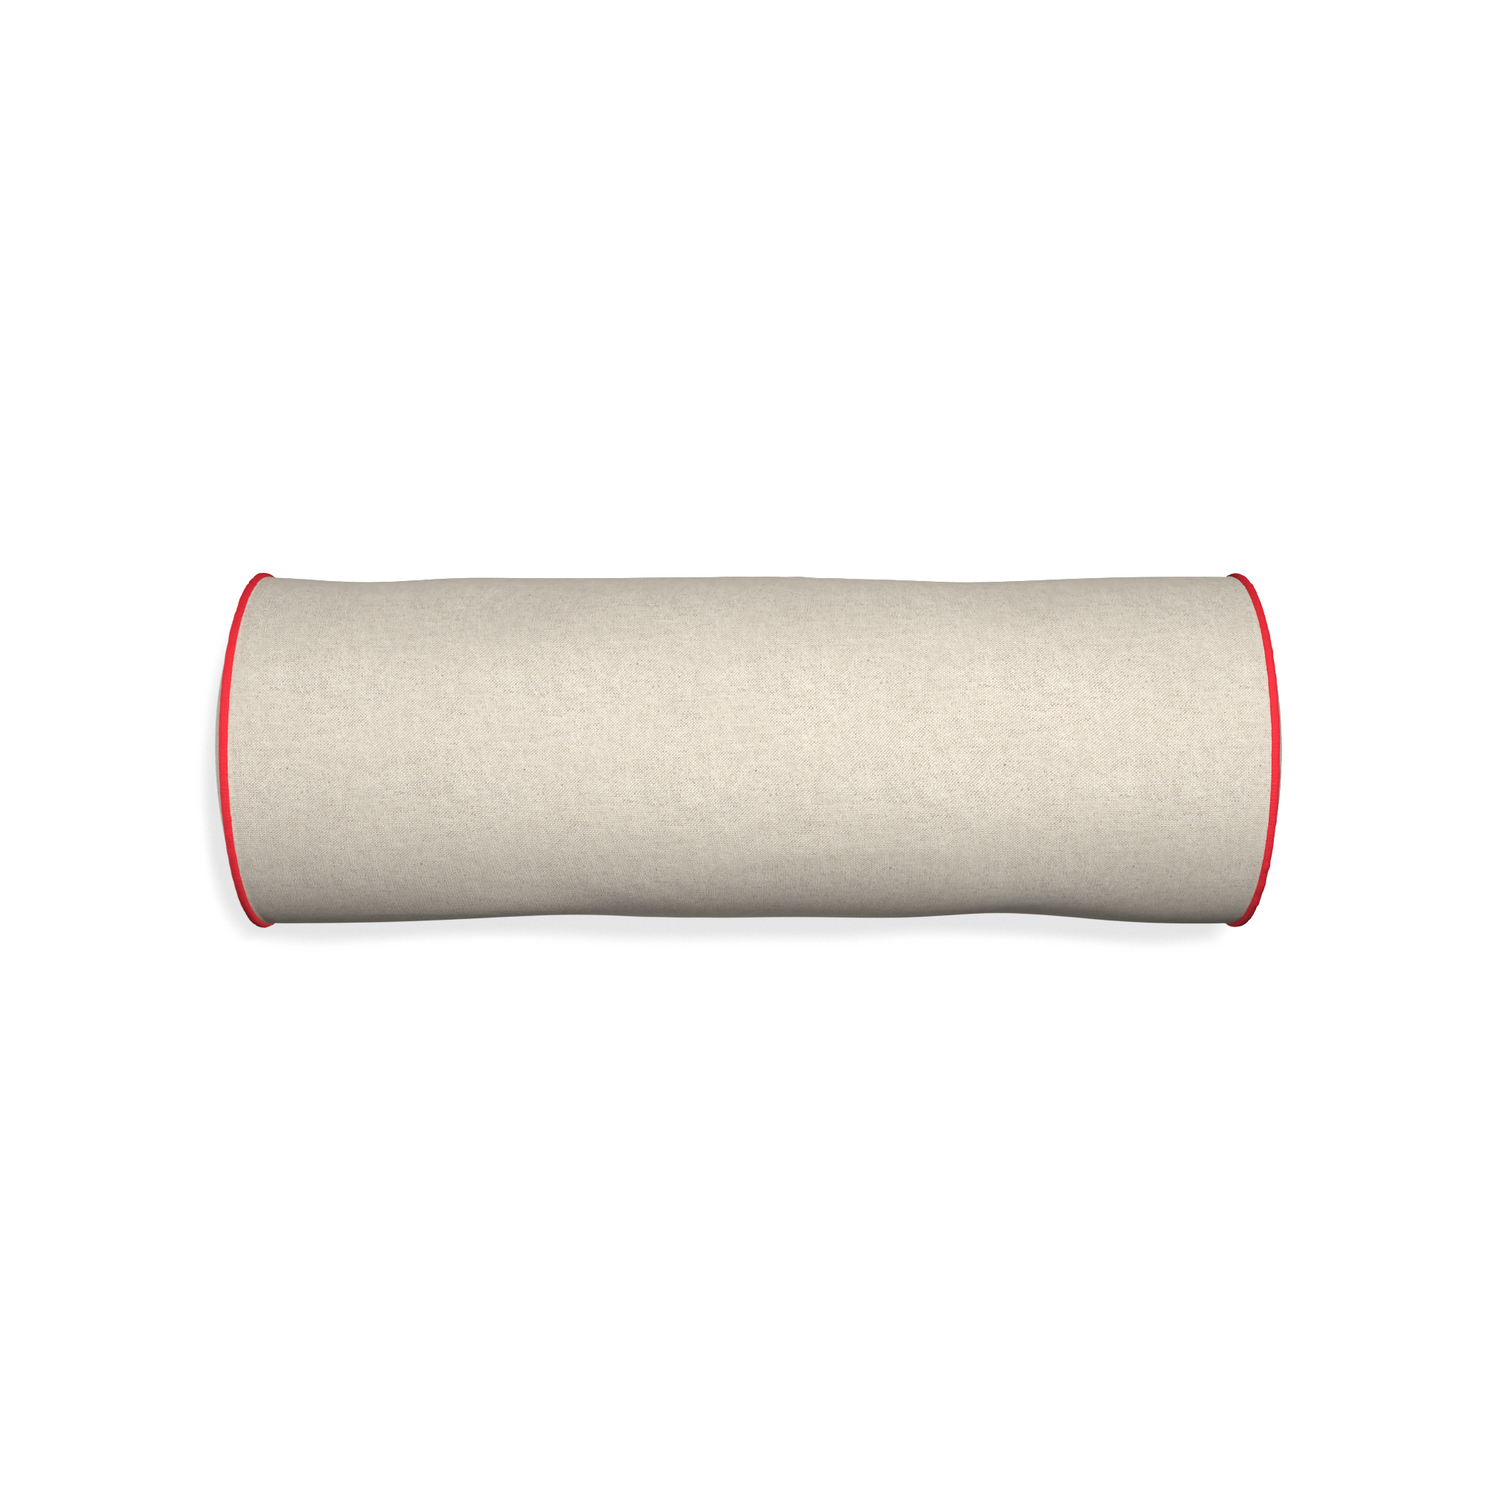 Bolster oat custom light brownpillow with cherry piping on white background